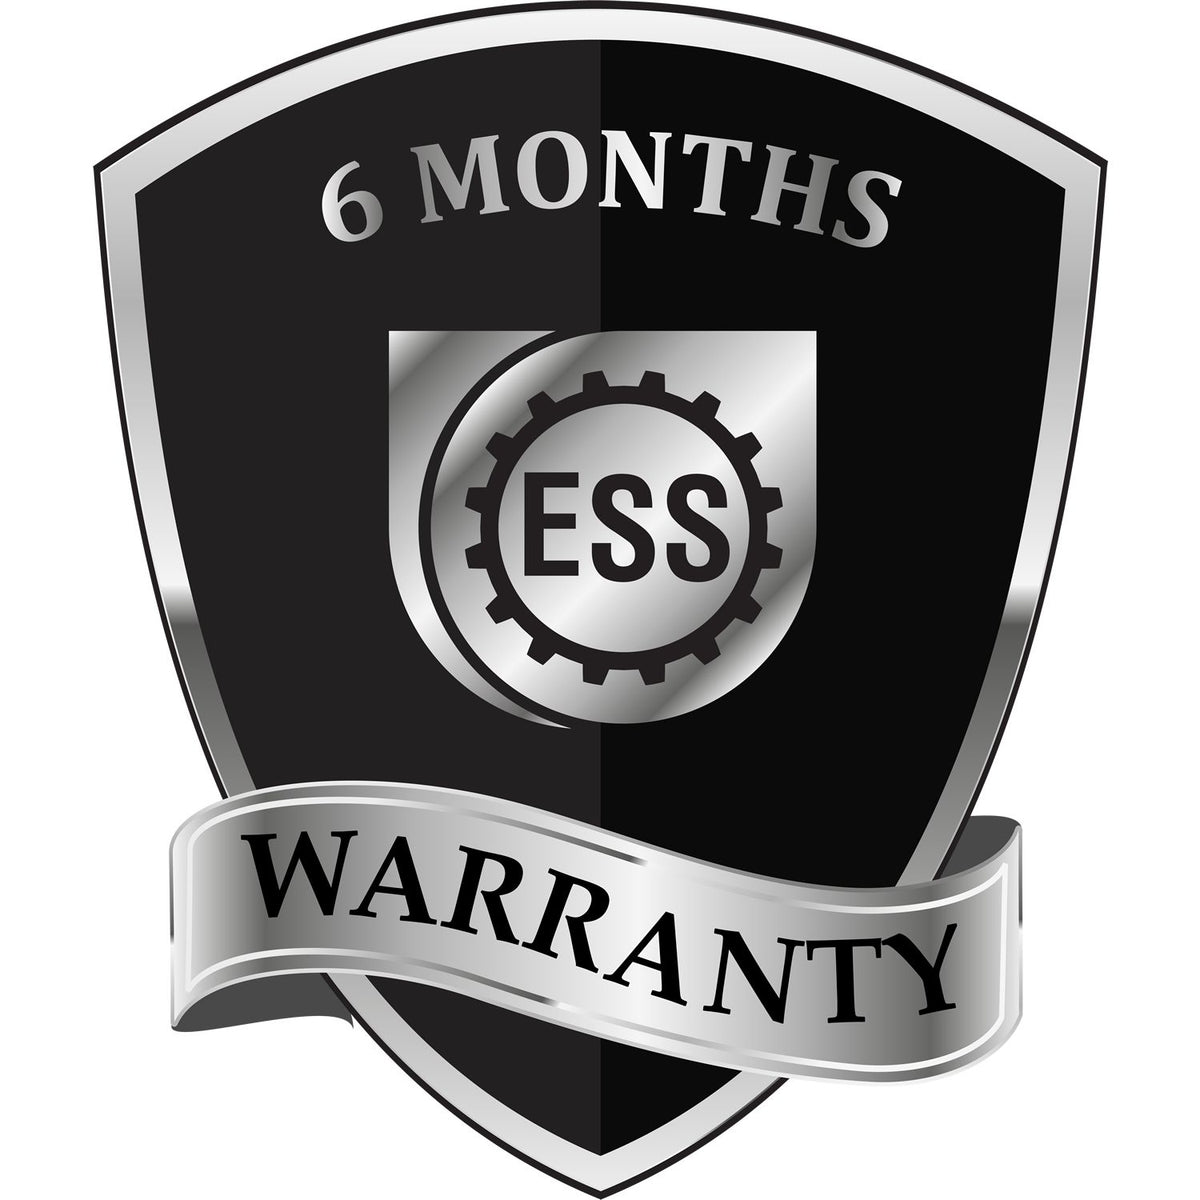 A black and silver badge or emblem showing warranty information for the Kansas Professional Geologist Seal Stamp